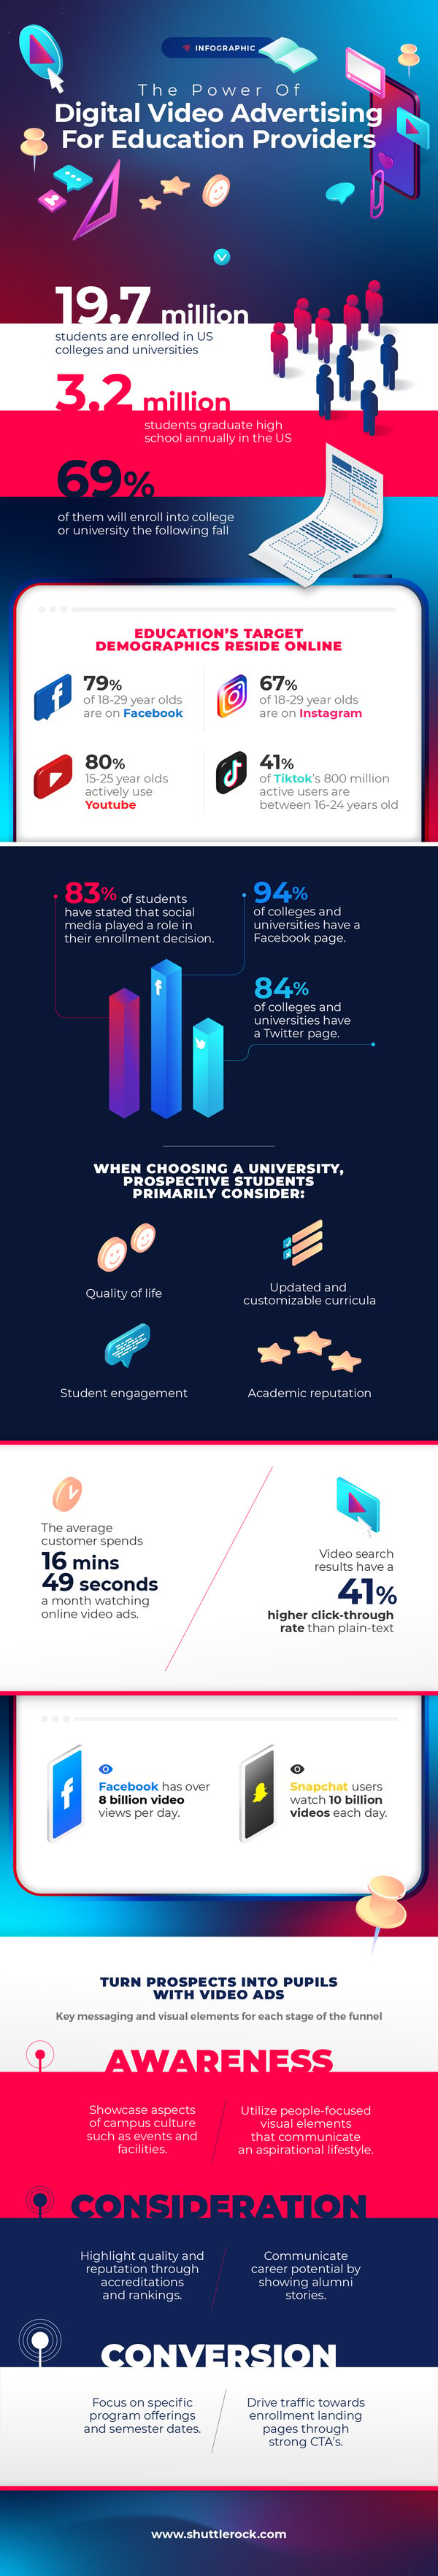 1020_IG001-Education_Infographic